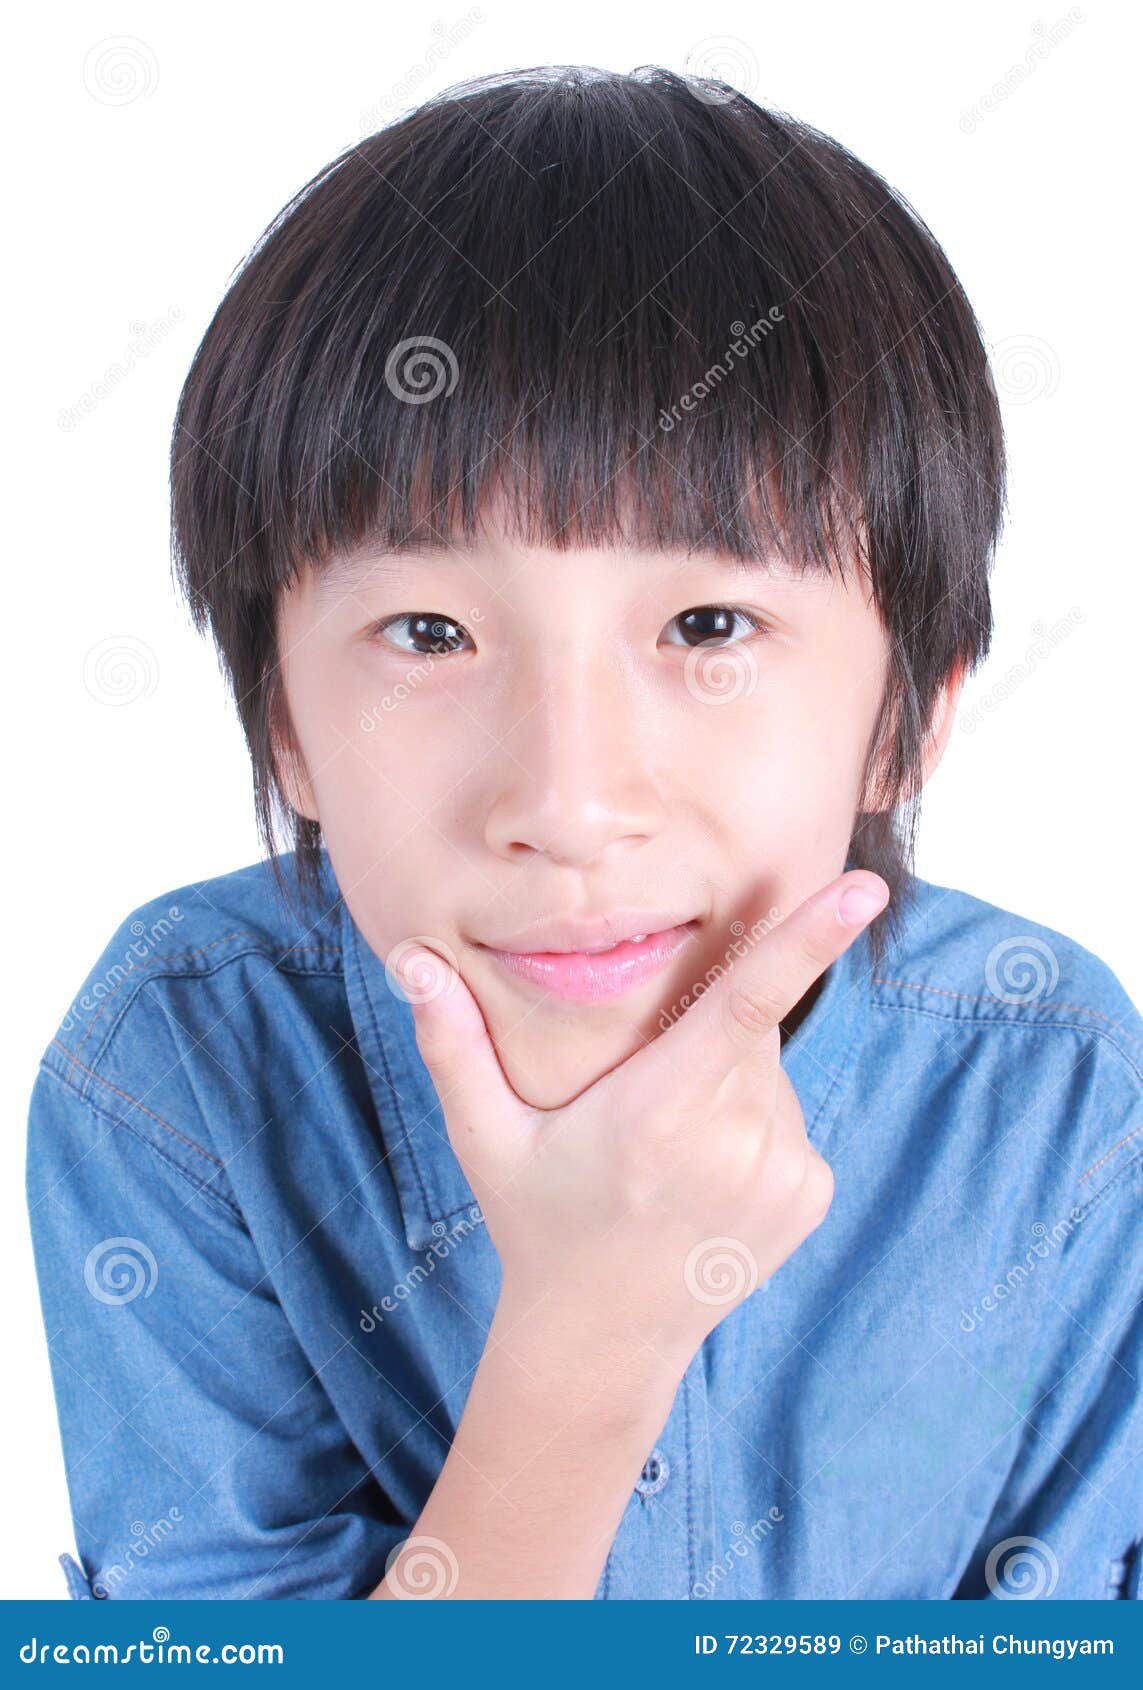 Photo of Adorable Young Happy Boy Stock Image - Image of happiness